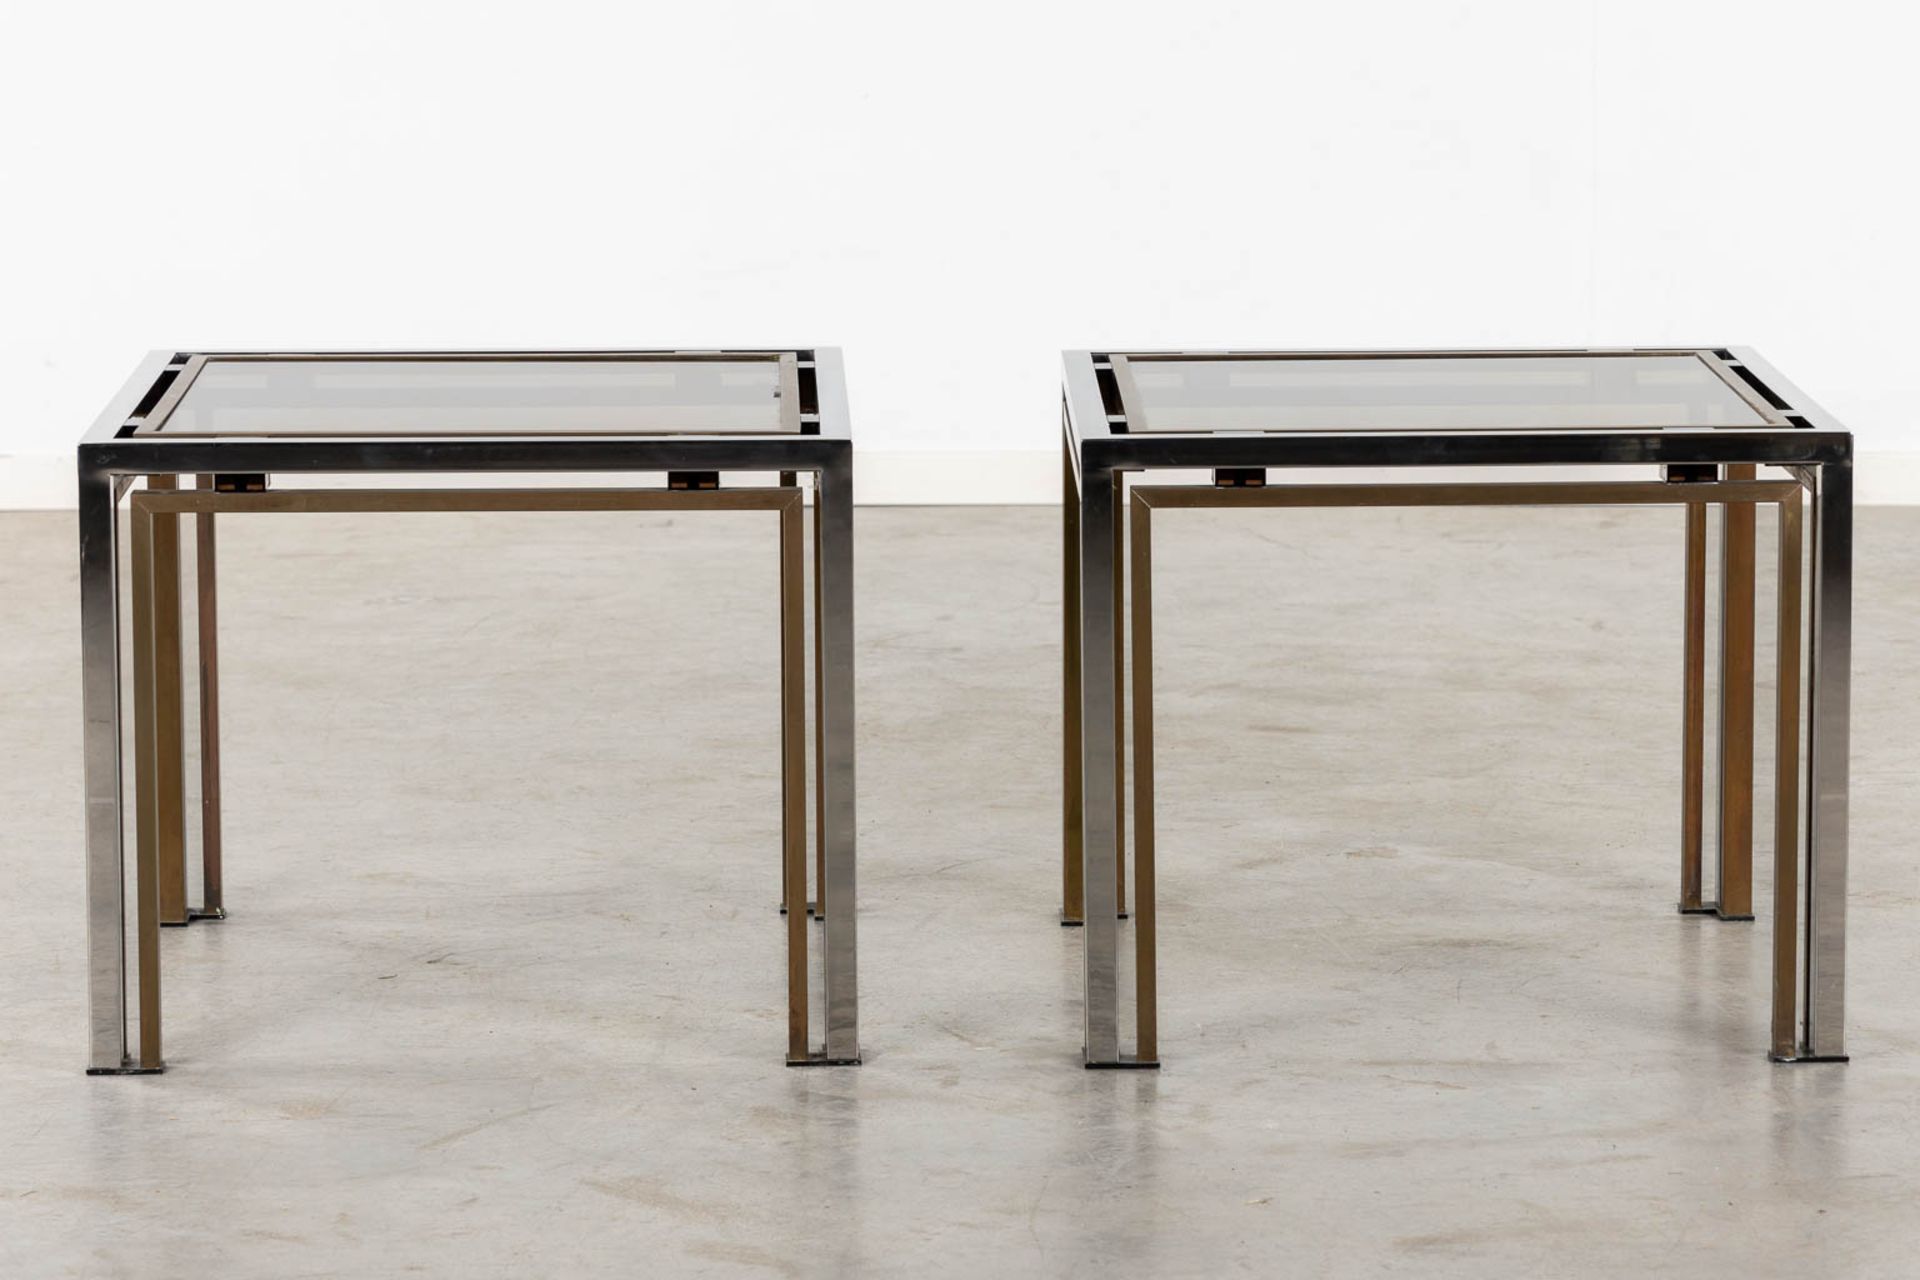 Four identical tables, brass and glass. Dewulf Selection / Belgo Chrome. (L:60 x W:60 x H:50 cm) - Image 4 of 12